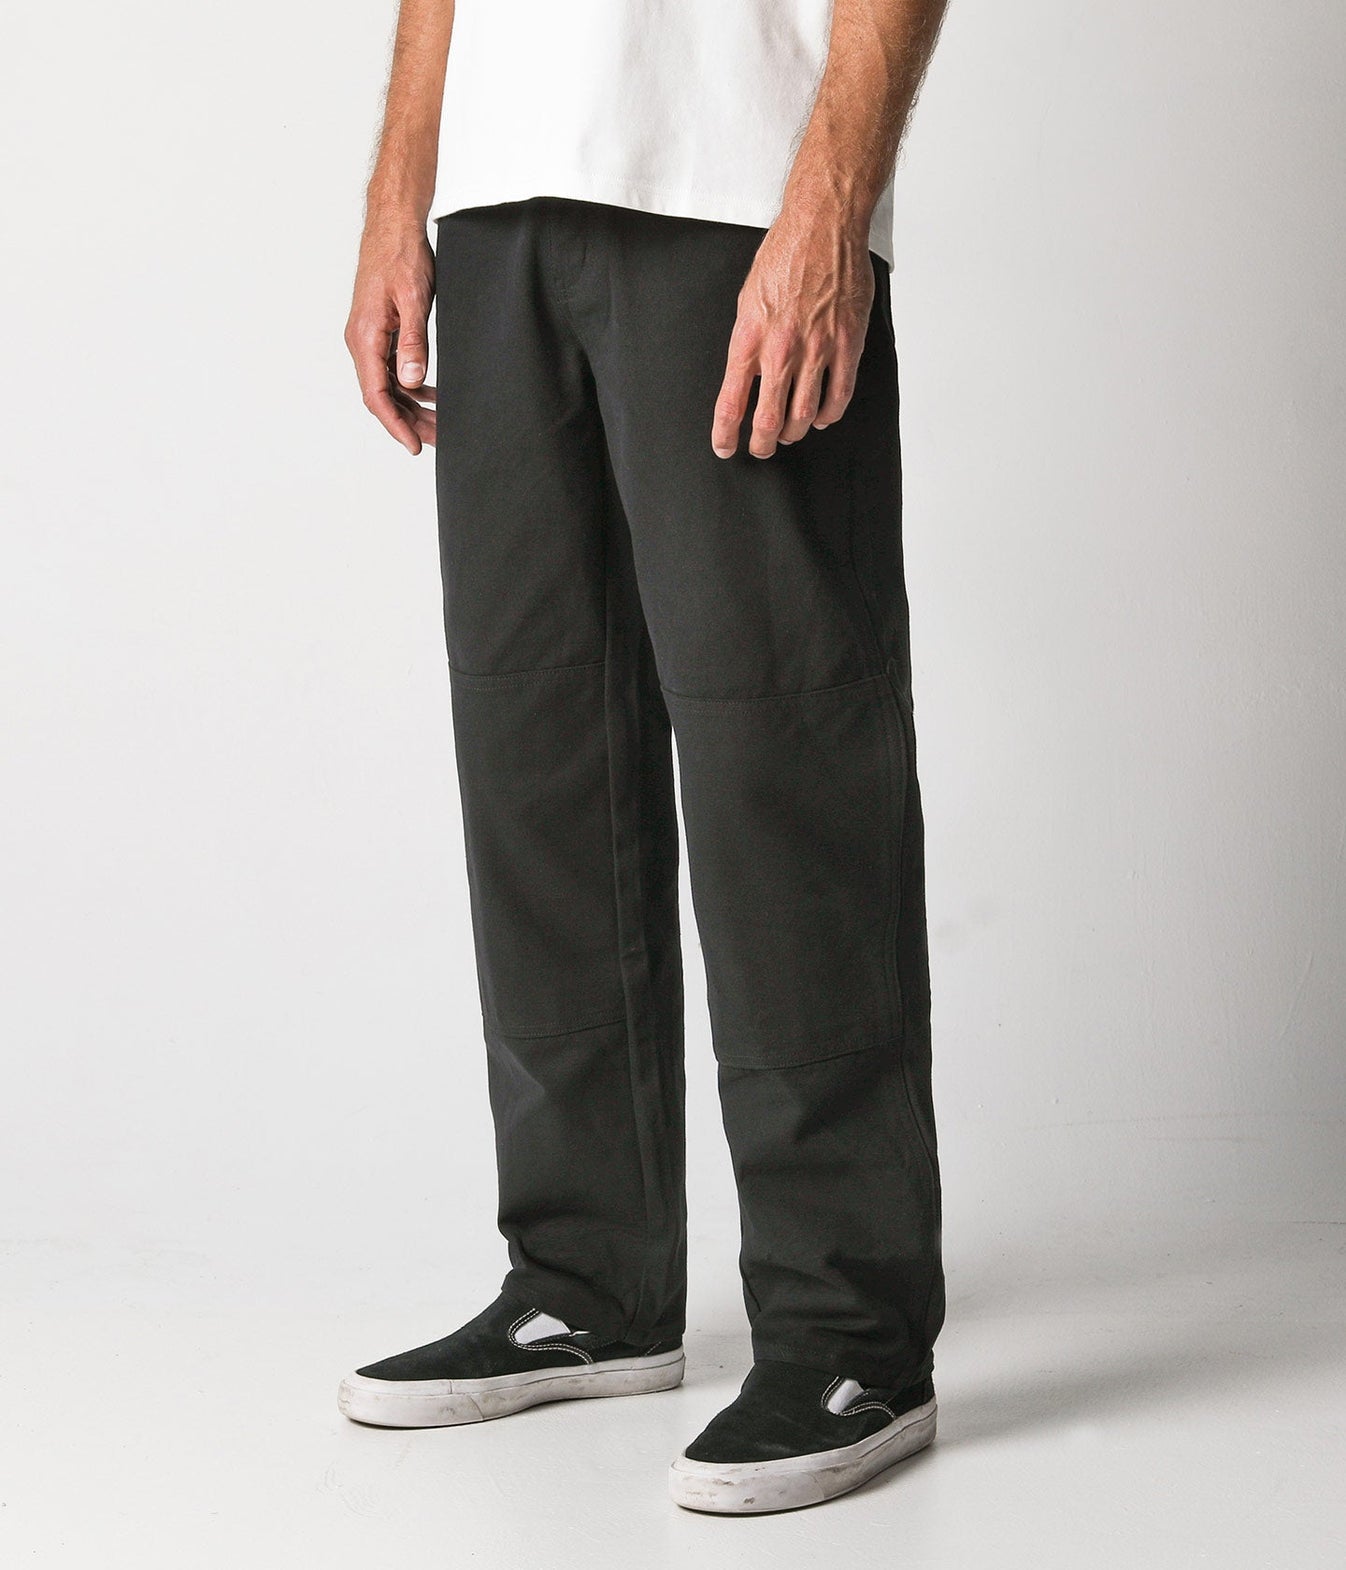 Distend Double Knee Pant